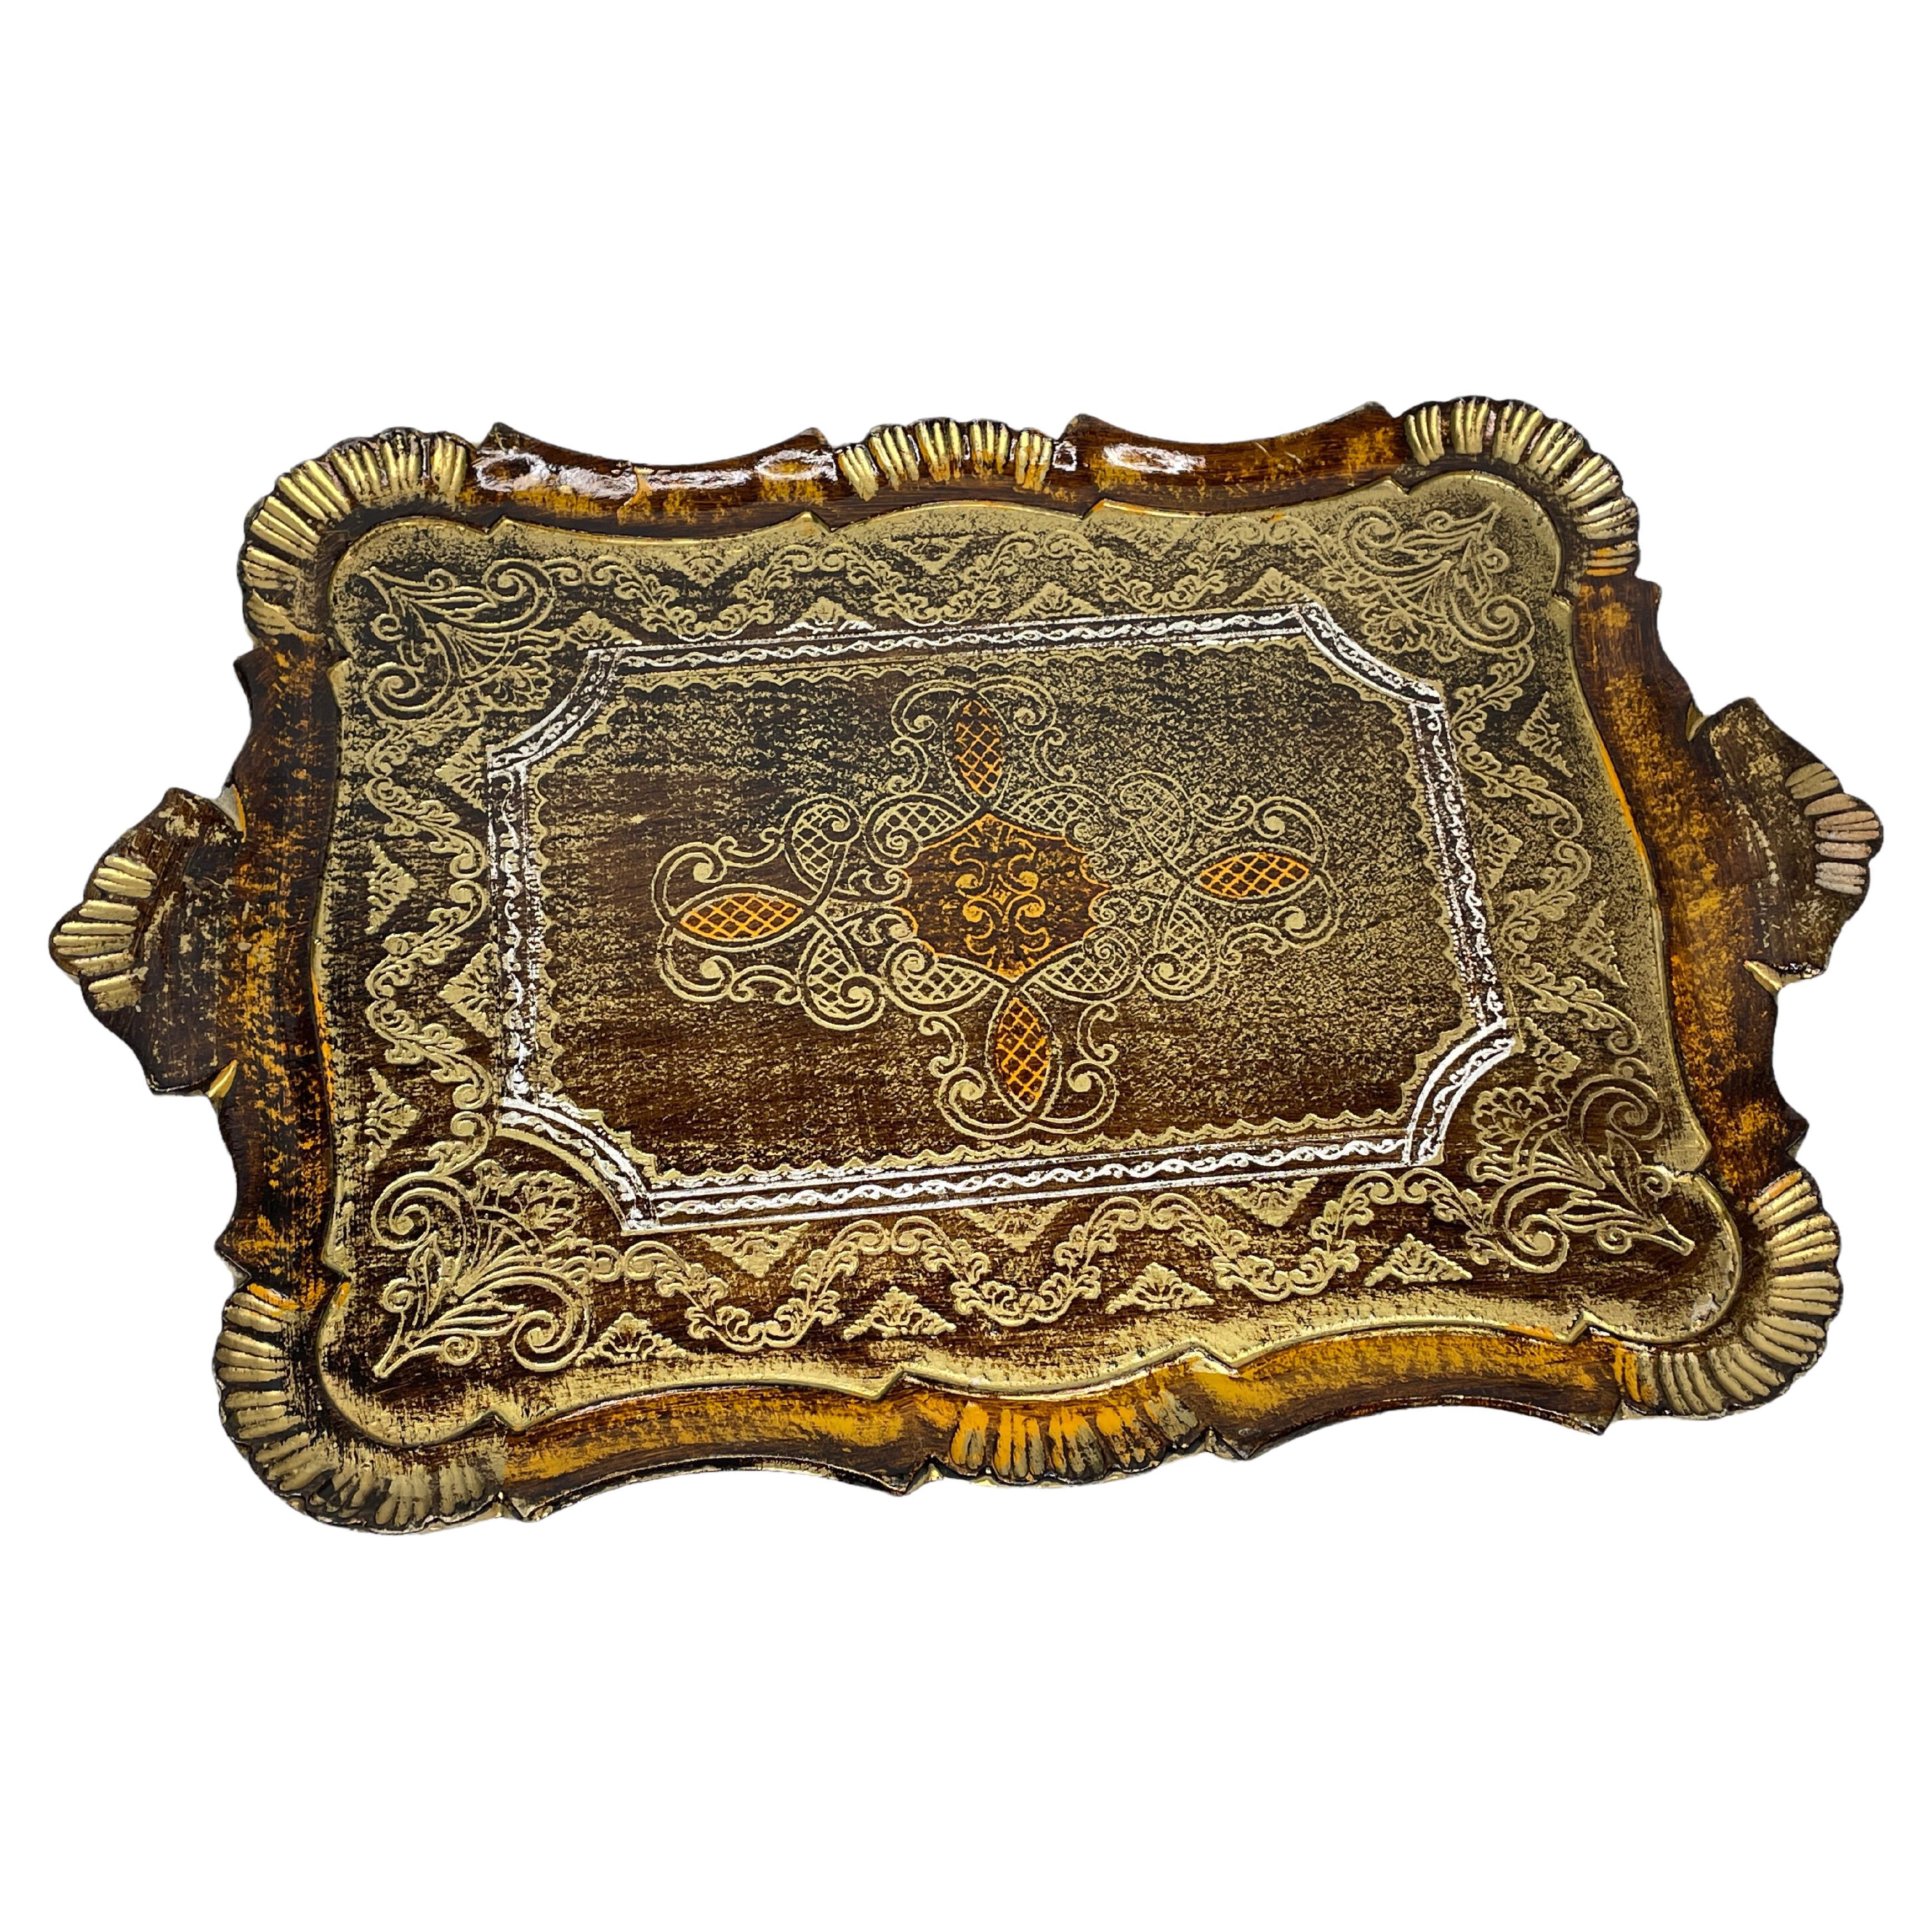 What is a Florentine tray?